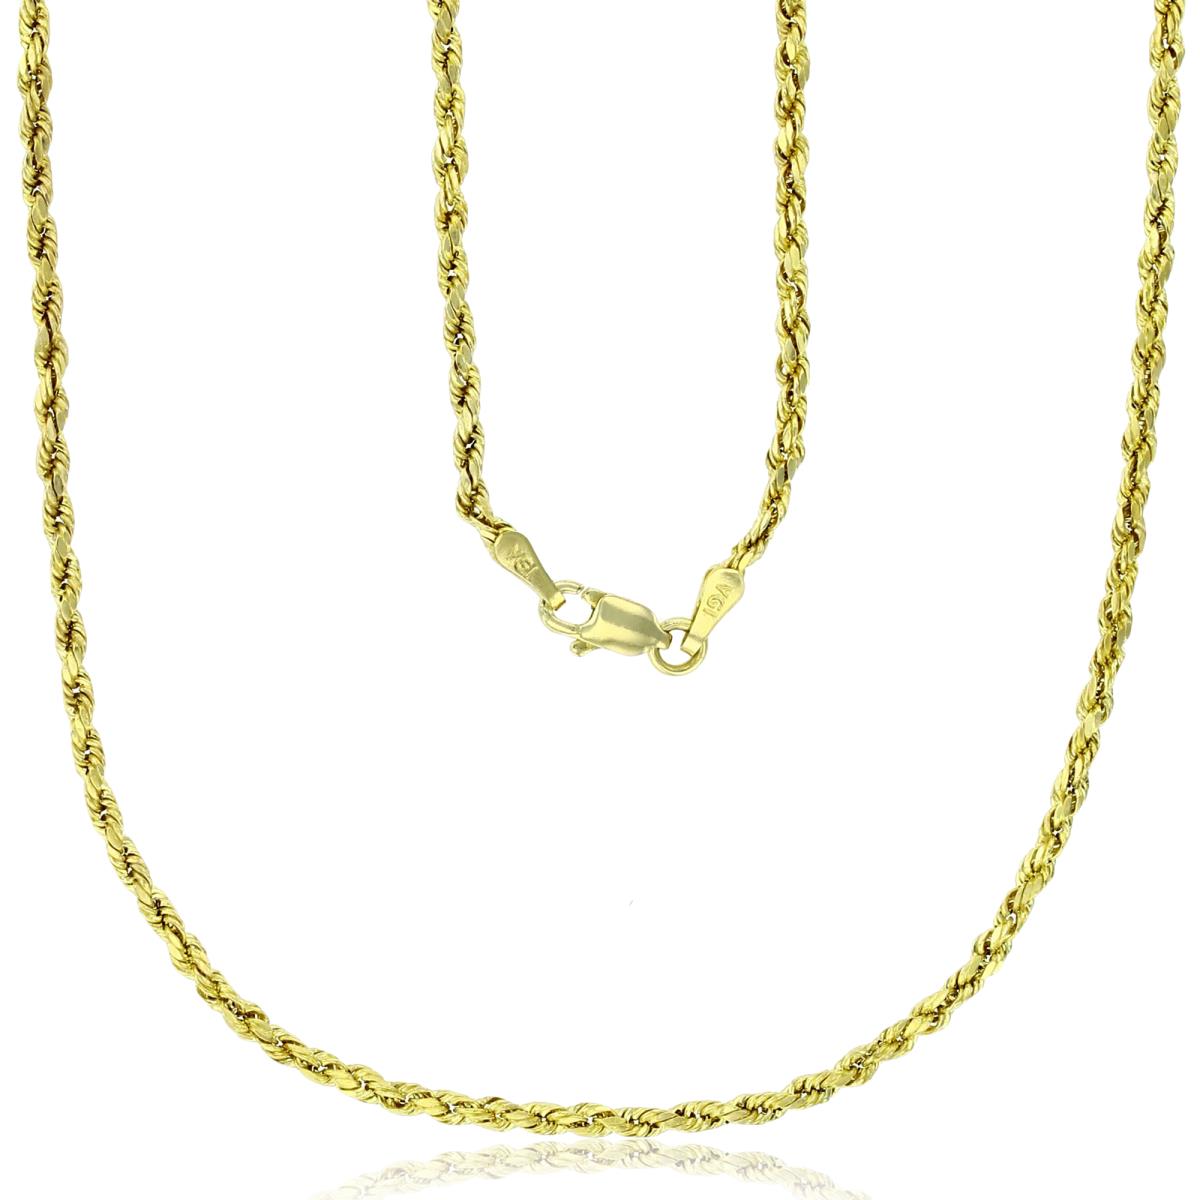 10k Yellow Gold 2mm DC Hollow Rope 016 8" Chain Bracelet